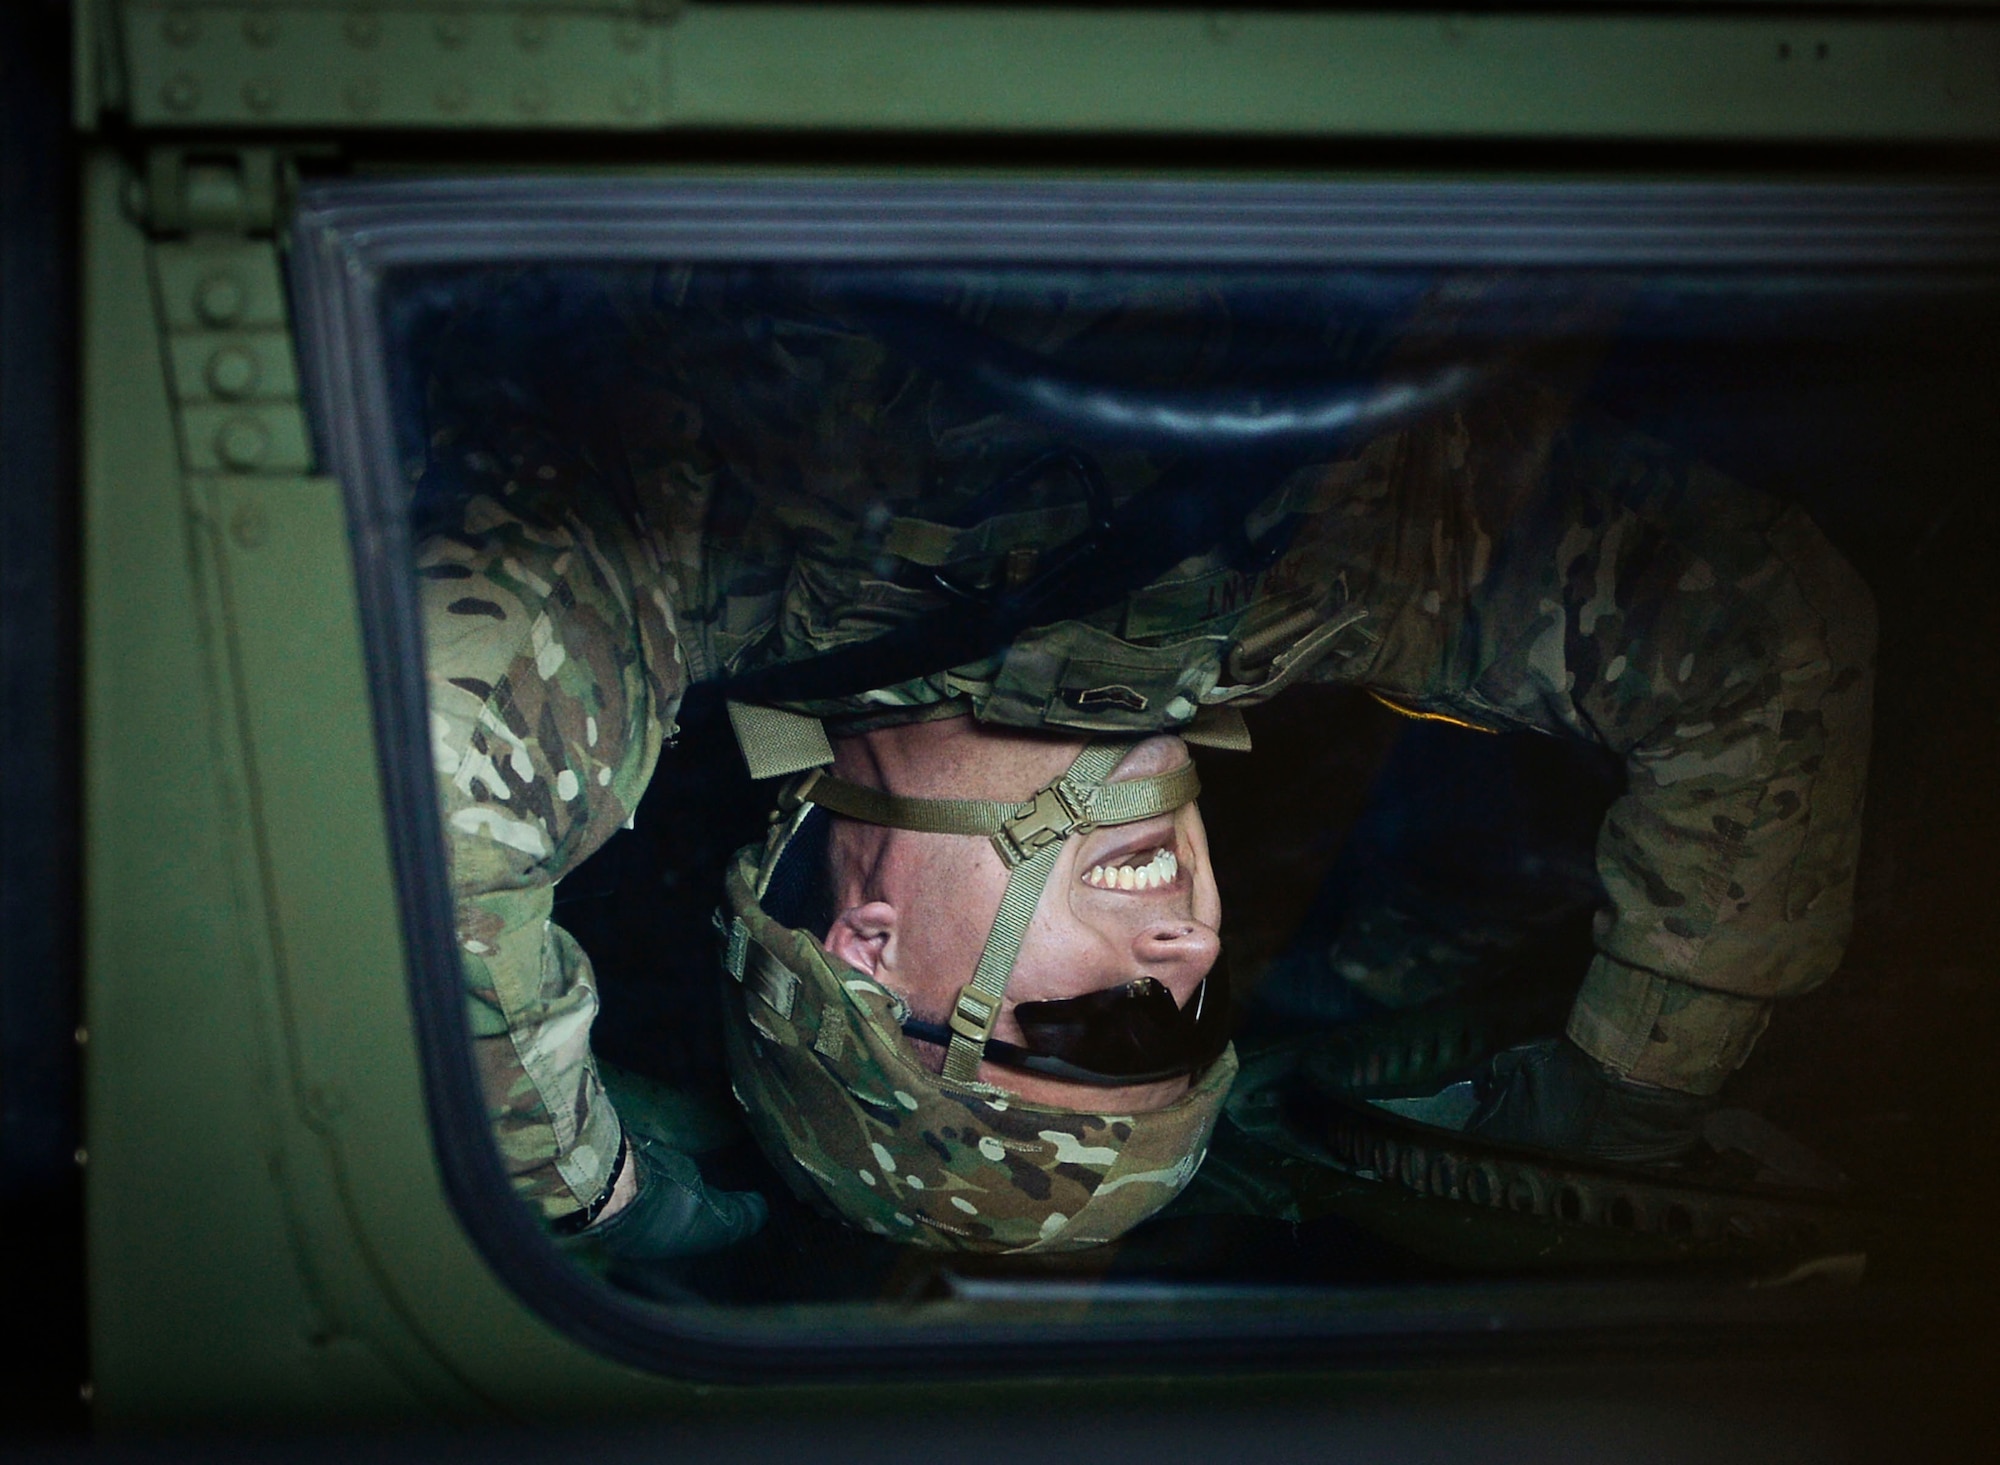 U.S. Air Force Airman 1st Class Athon Arant, 7th Weather Squadron weather apprentice, laughs as he flips upside-down in a Humvee egress assistance trainer on Lucius D. Clay Kaserne, Germany, June 14, 2017. HEAT simulators are designed to imitate a Humvee rolling over. The 7th WS regularly trains its Airmen to enhance their capabilities of working with the U.S. Army. (U.S. Air Force photo by Airman 1st Class Joshua Magbanua)